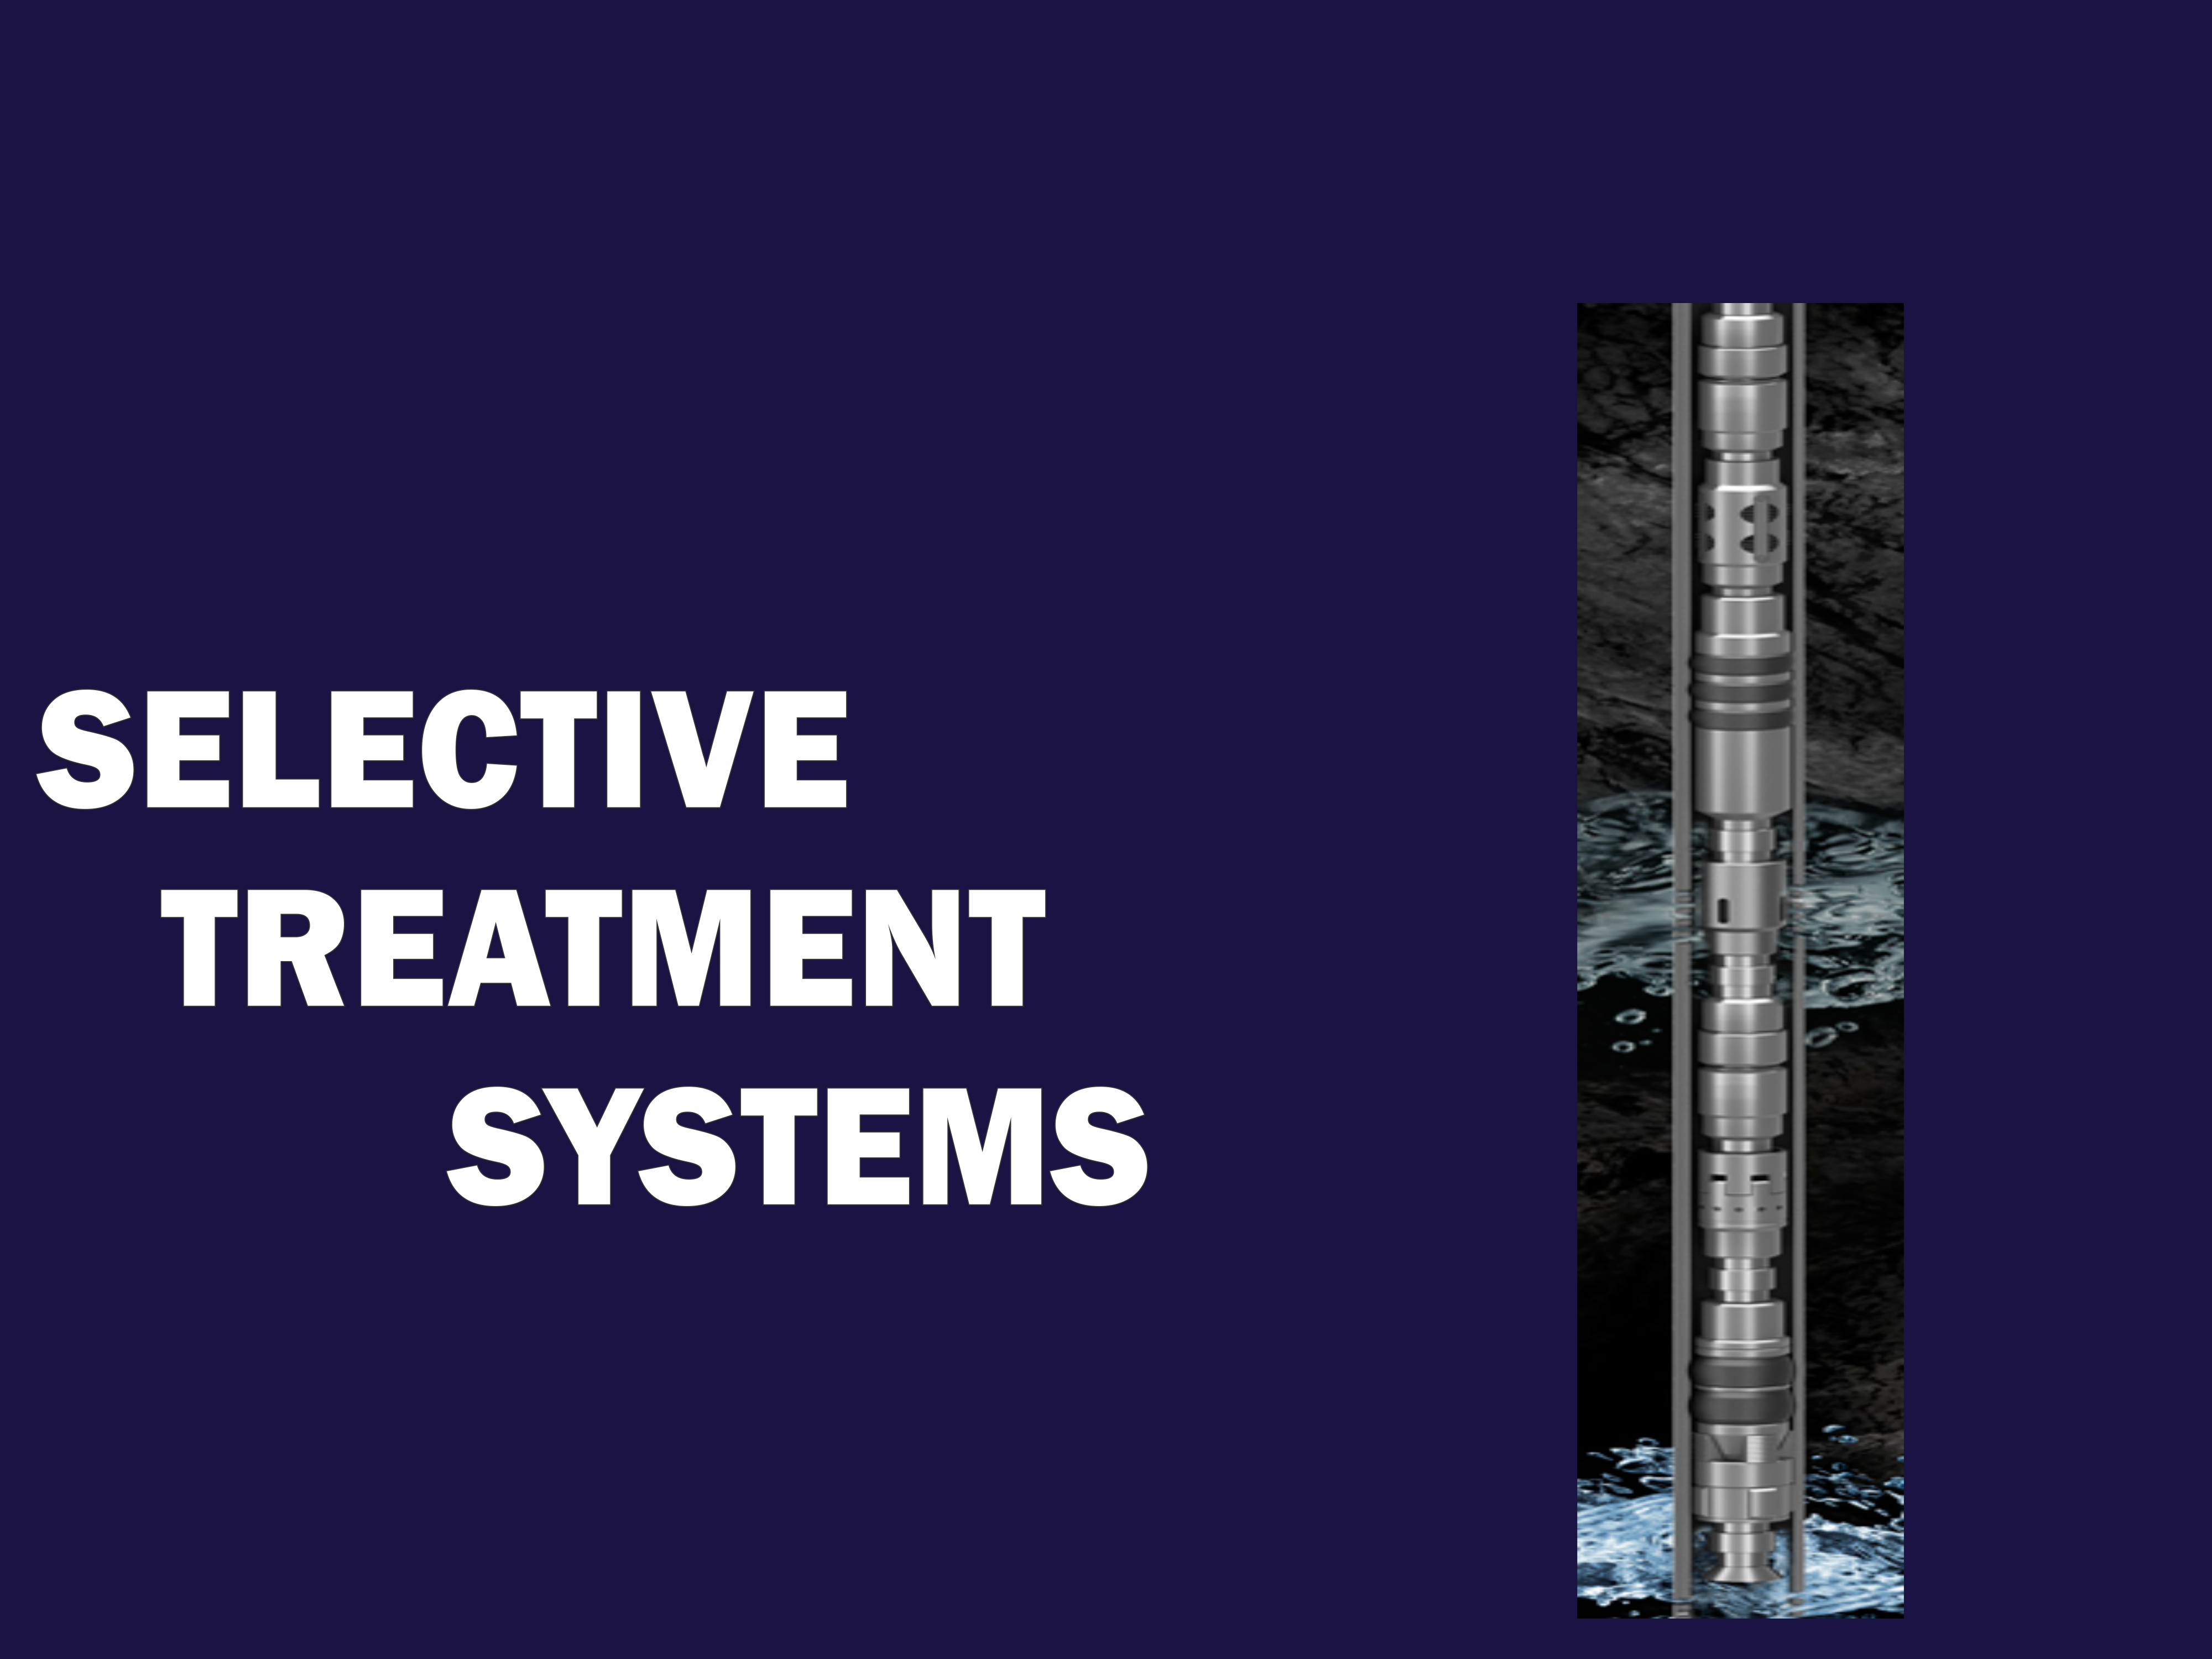 Selective treatment straddled systems, ESP packer completions